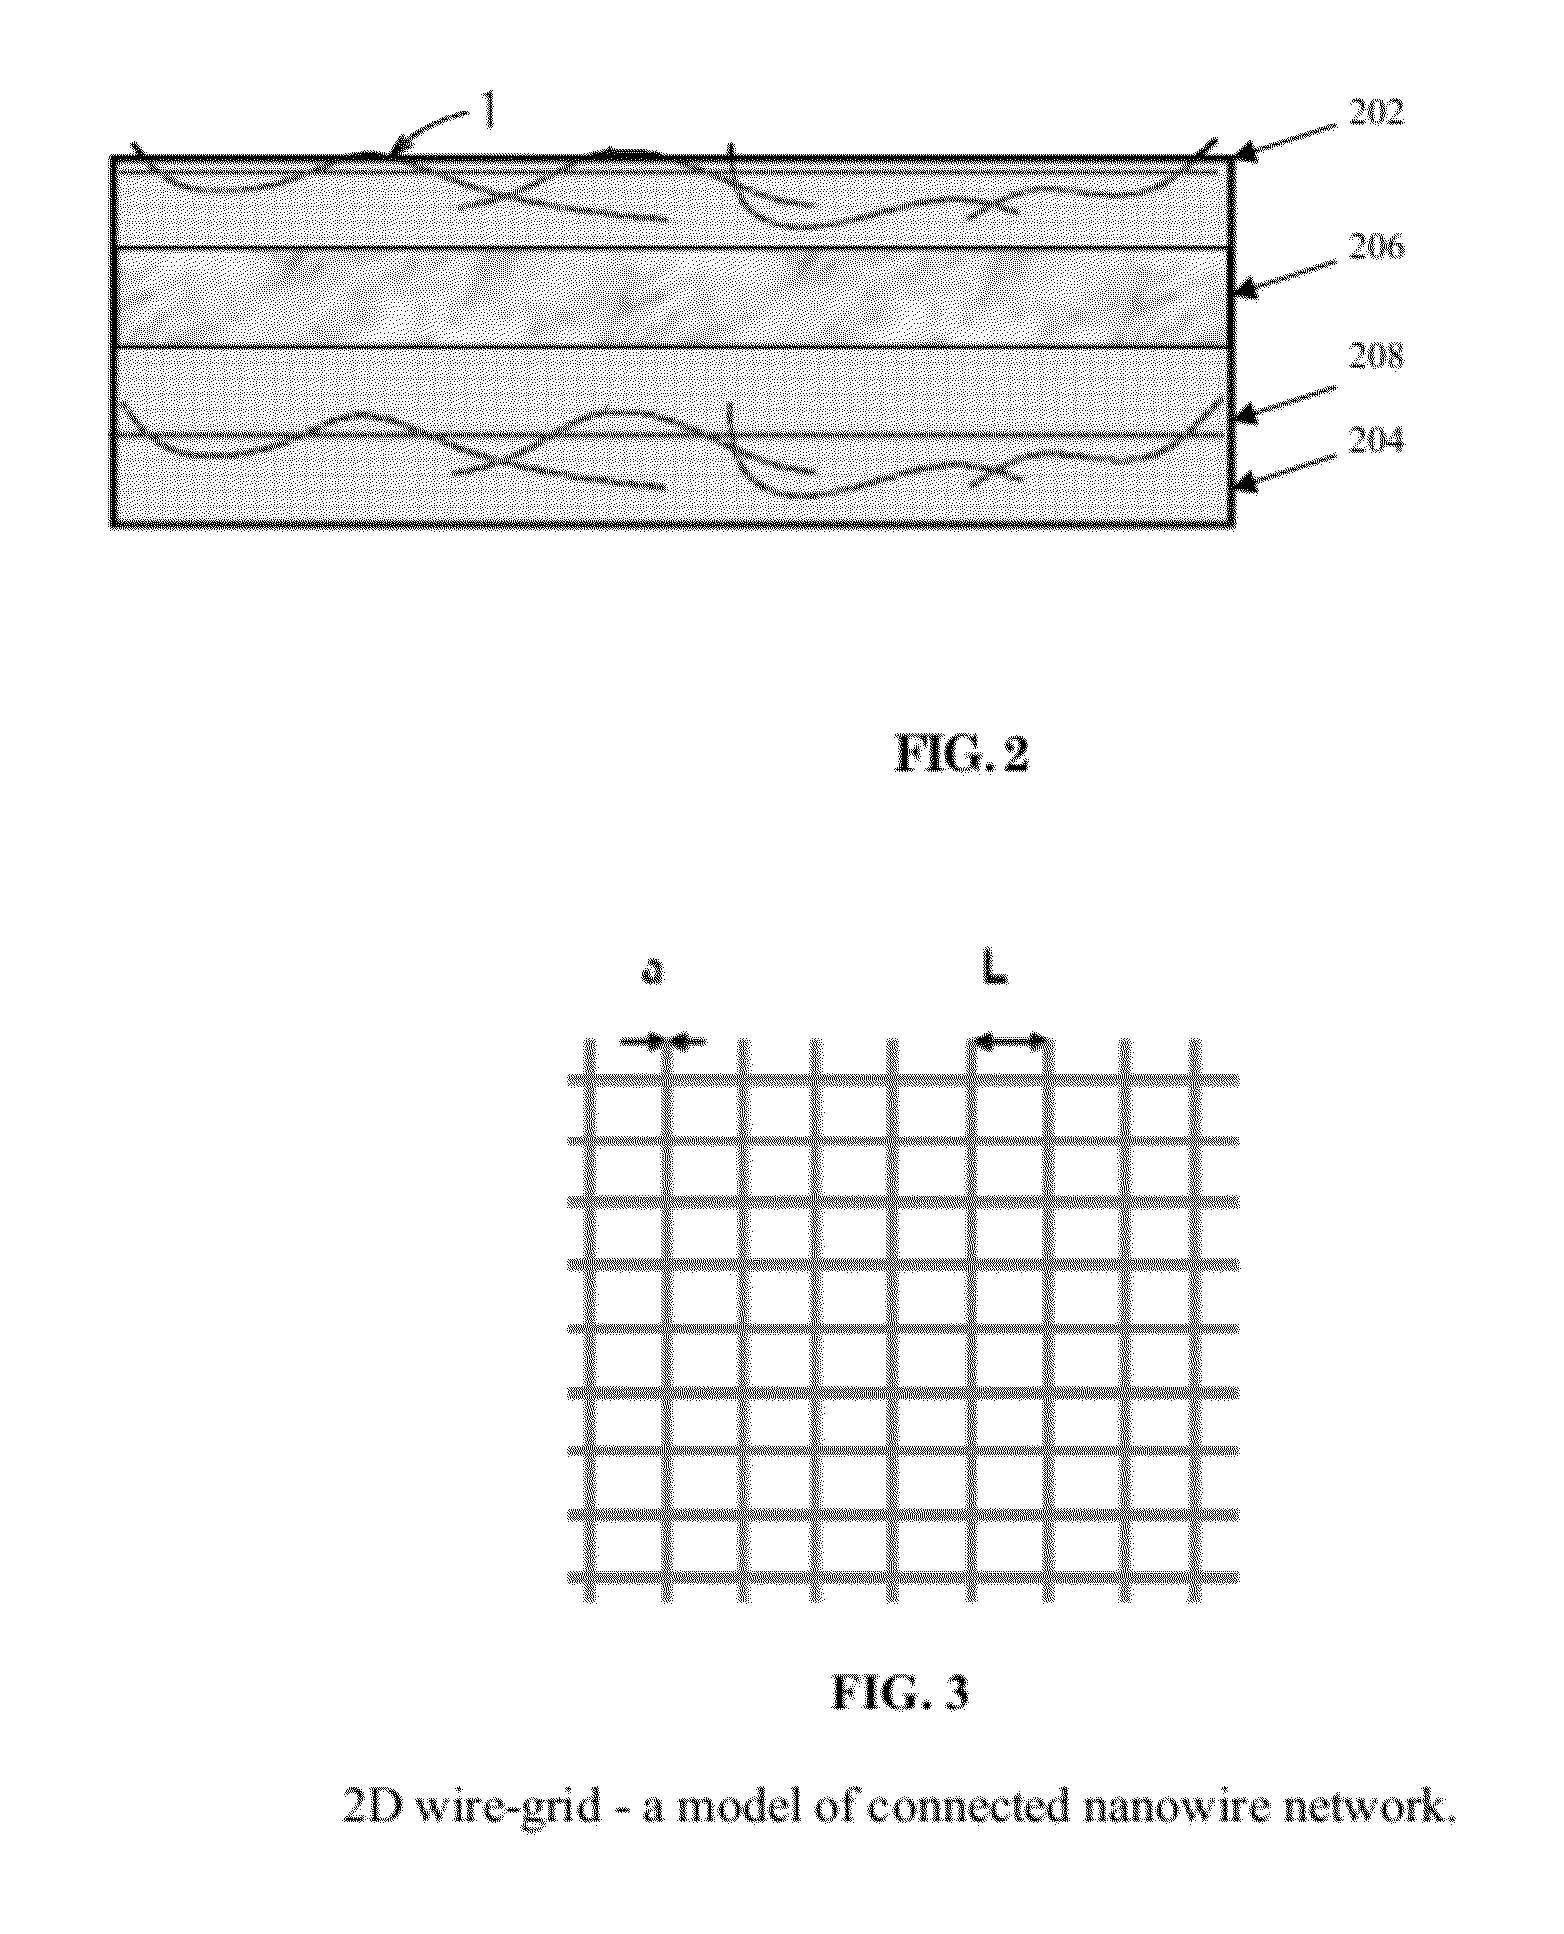 Conductive Biopolymer Implant For Enhancing Tissue Repair And Regeneration Using Electromagnetic Fields